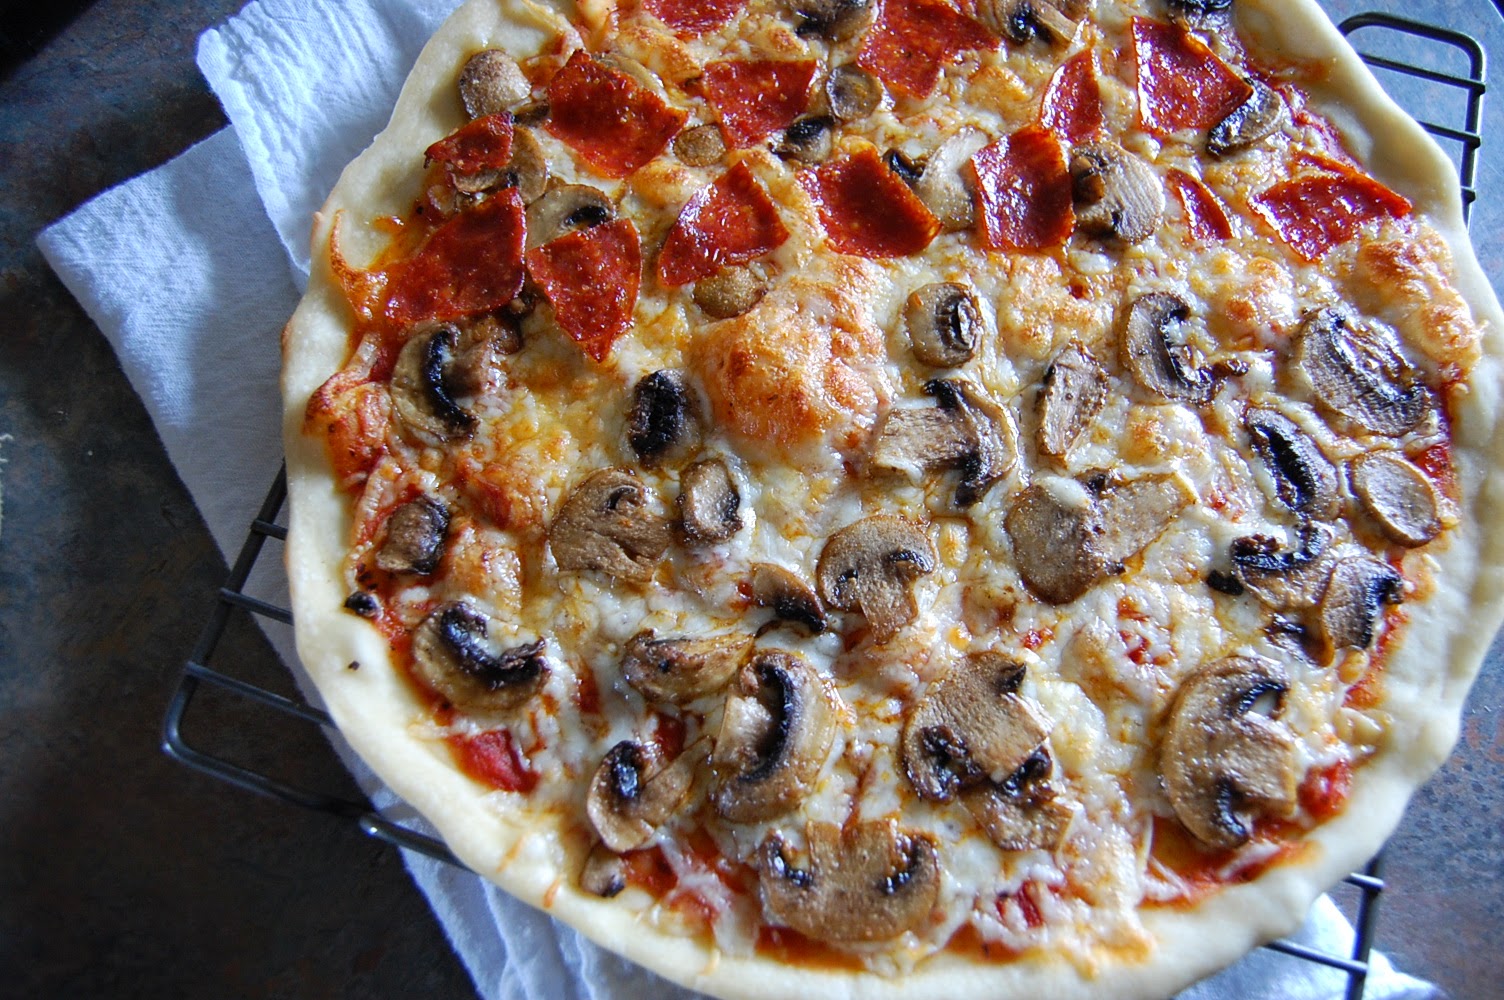 Goal of Losing Homemade Pizza Dough is